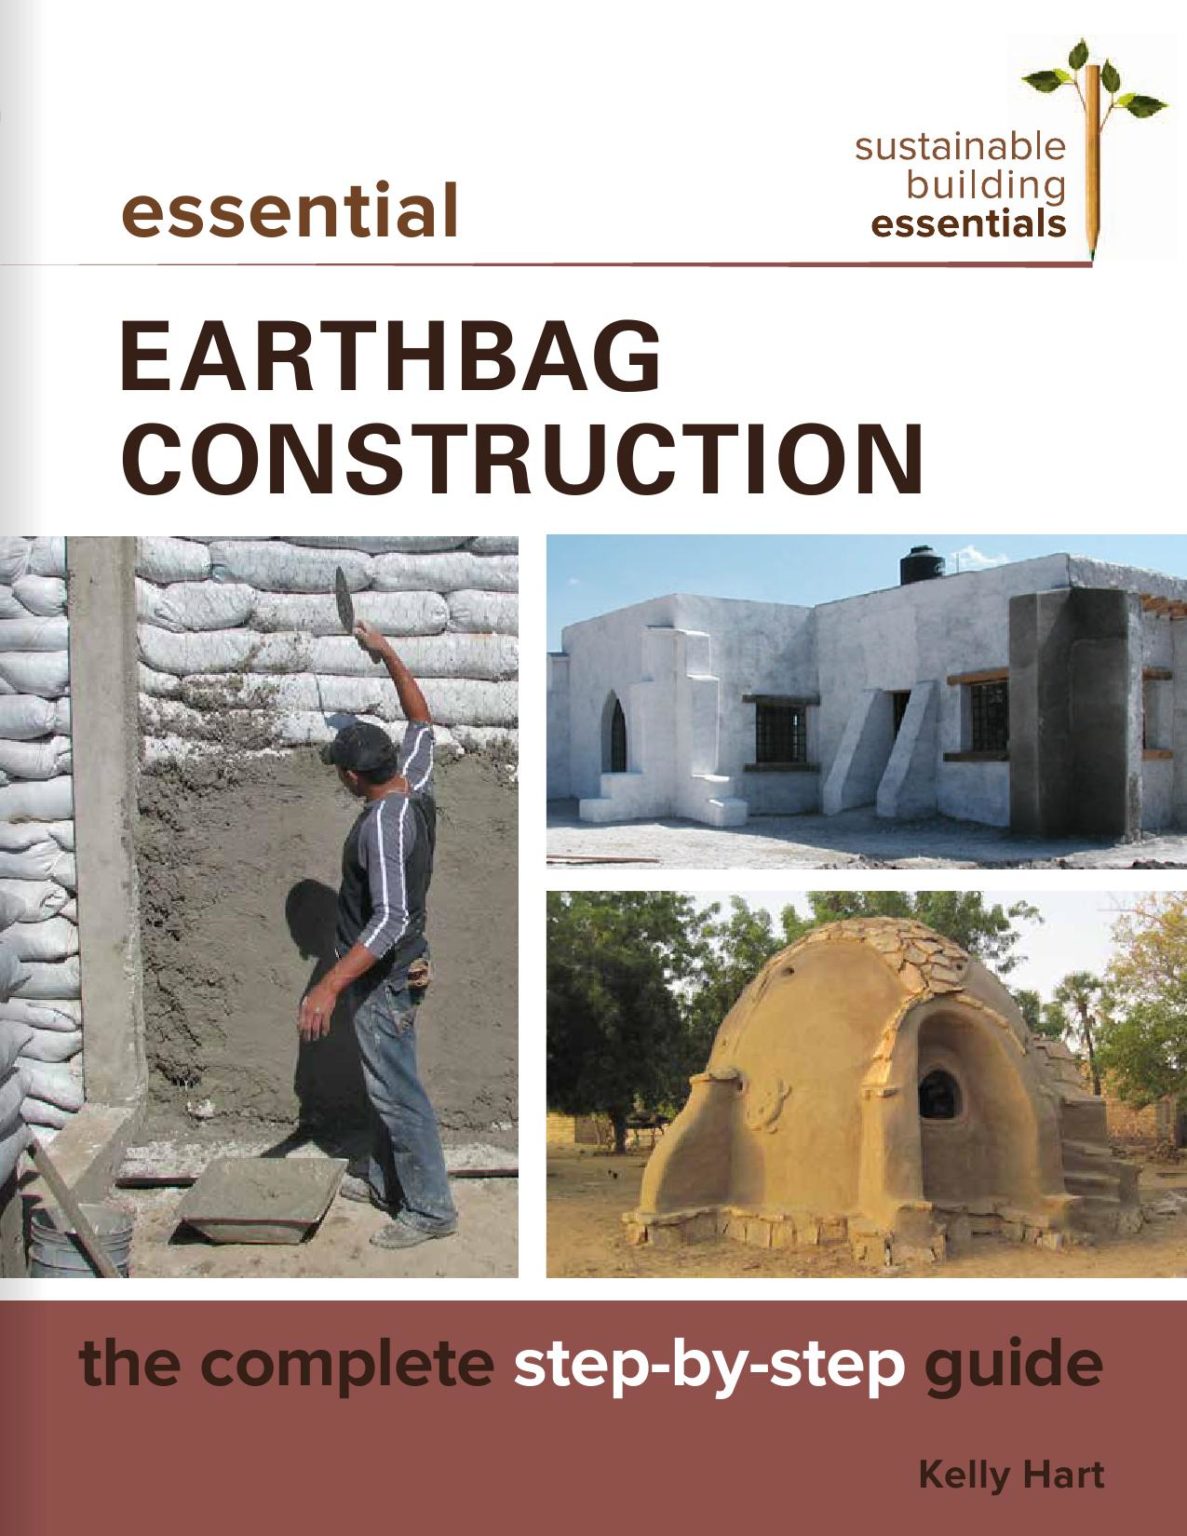 EARTHBAG CONSTRUCTION THE COMPLETE STEP-BY-STEP GUIDE